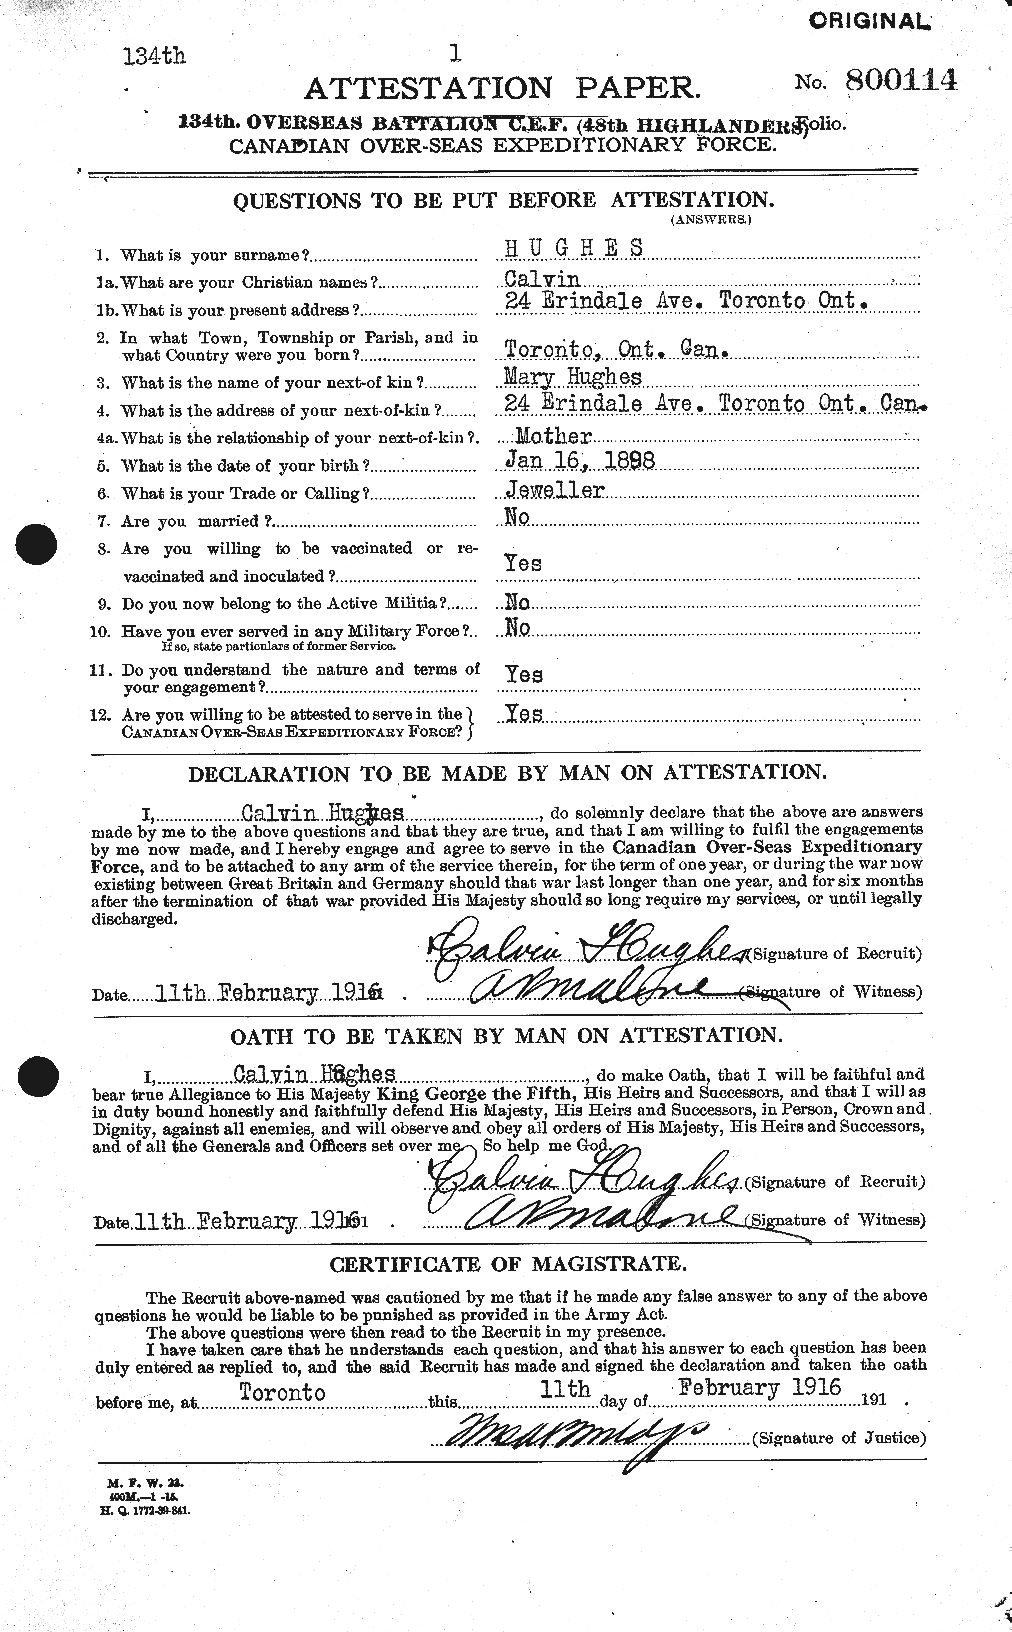 Personnel Records of the First World War - CEF 402591a